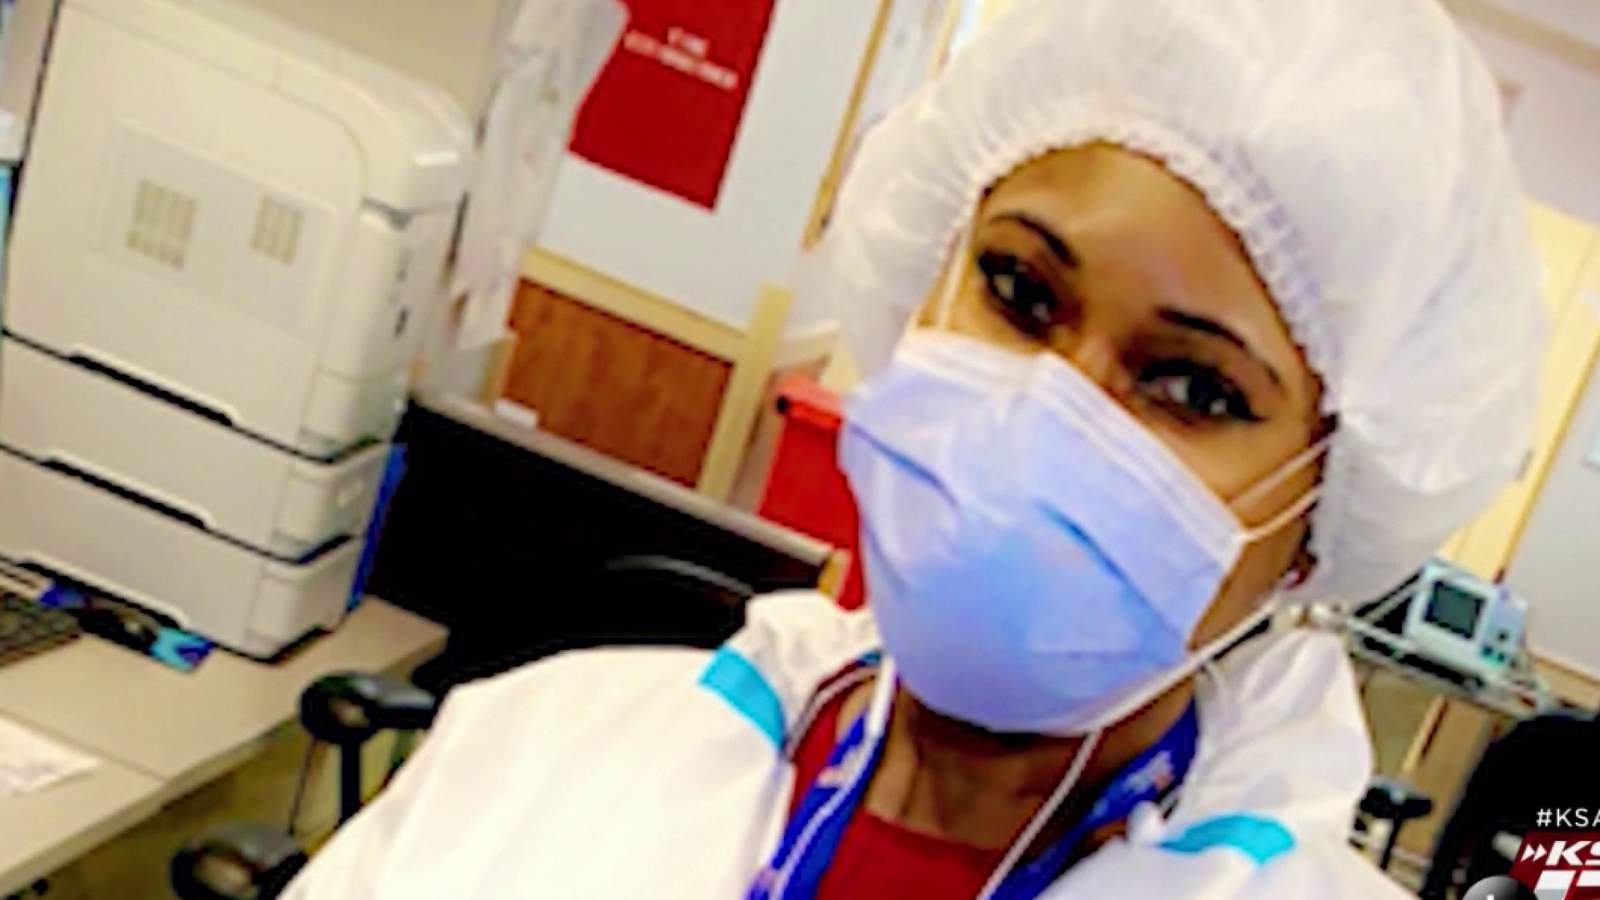 San Antonio nurse working on the frontlines reflects on COVID-19 experience